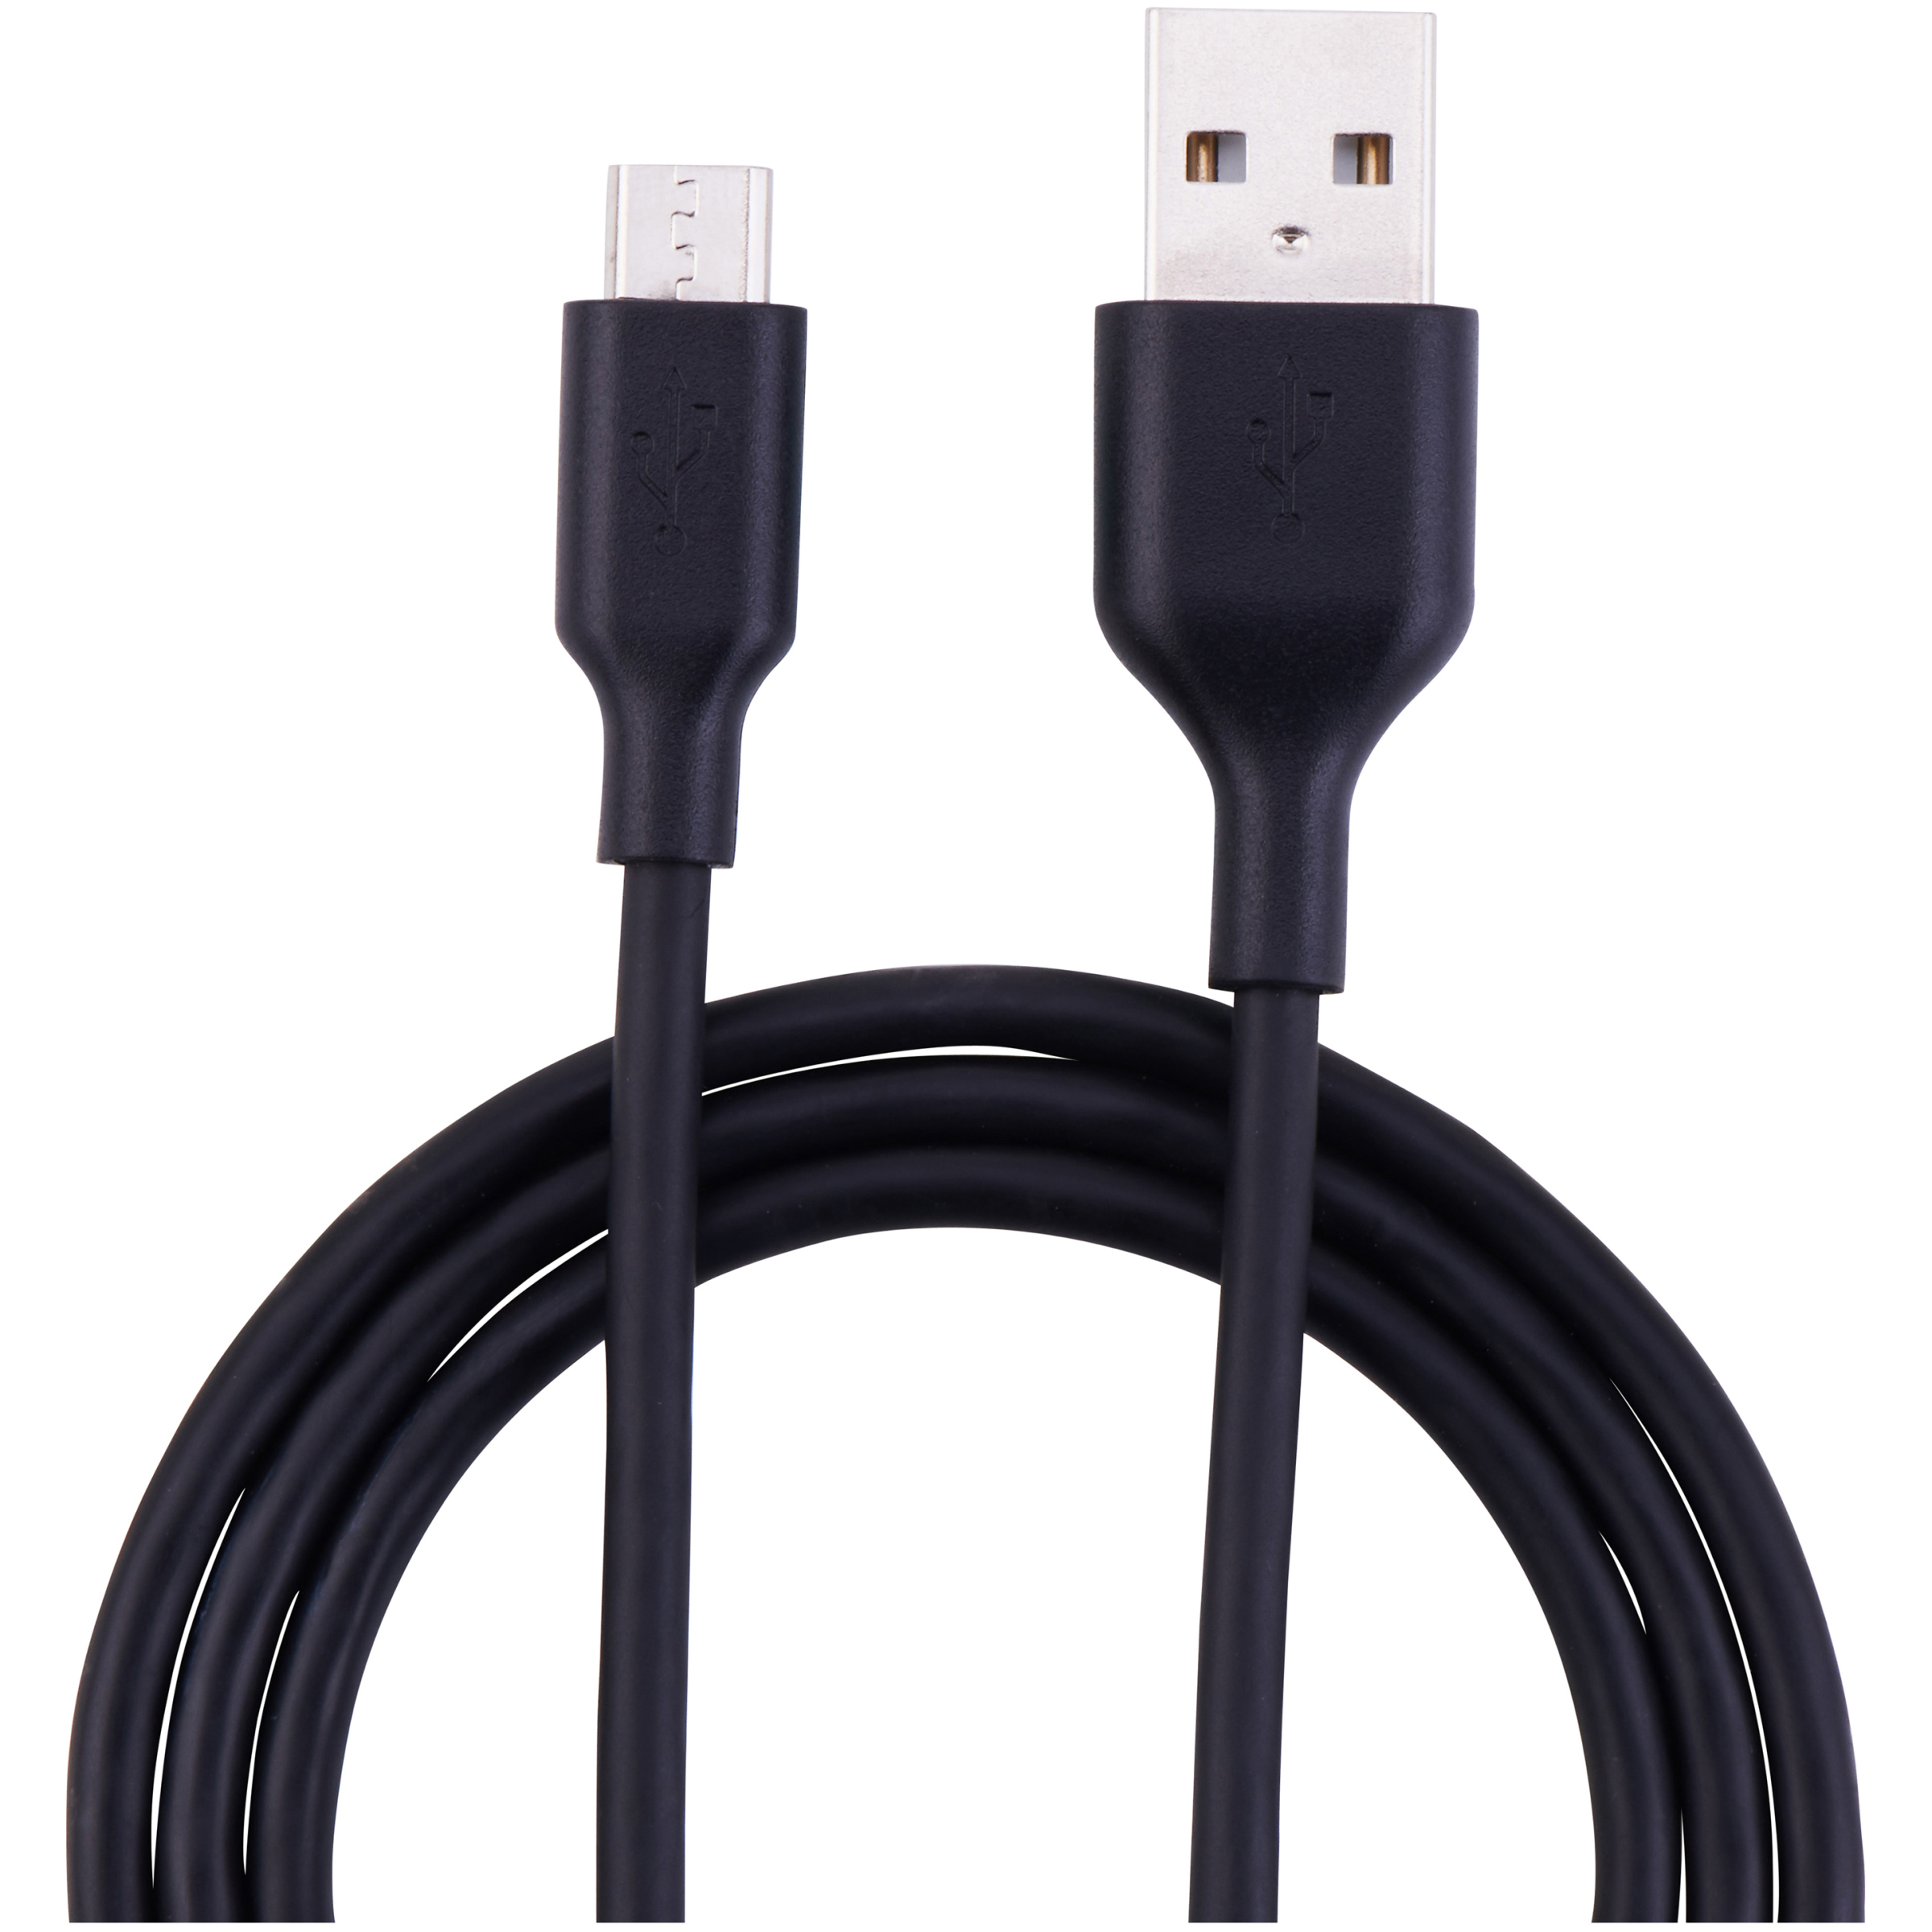 onn. 3-Foot Sync and Charge Cable with Micro USB Connector, High-Quality Construction - image 2 of 5